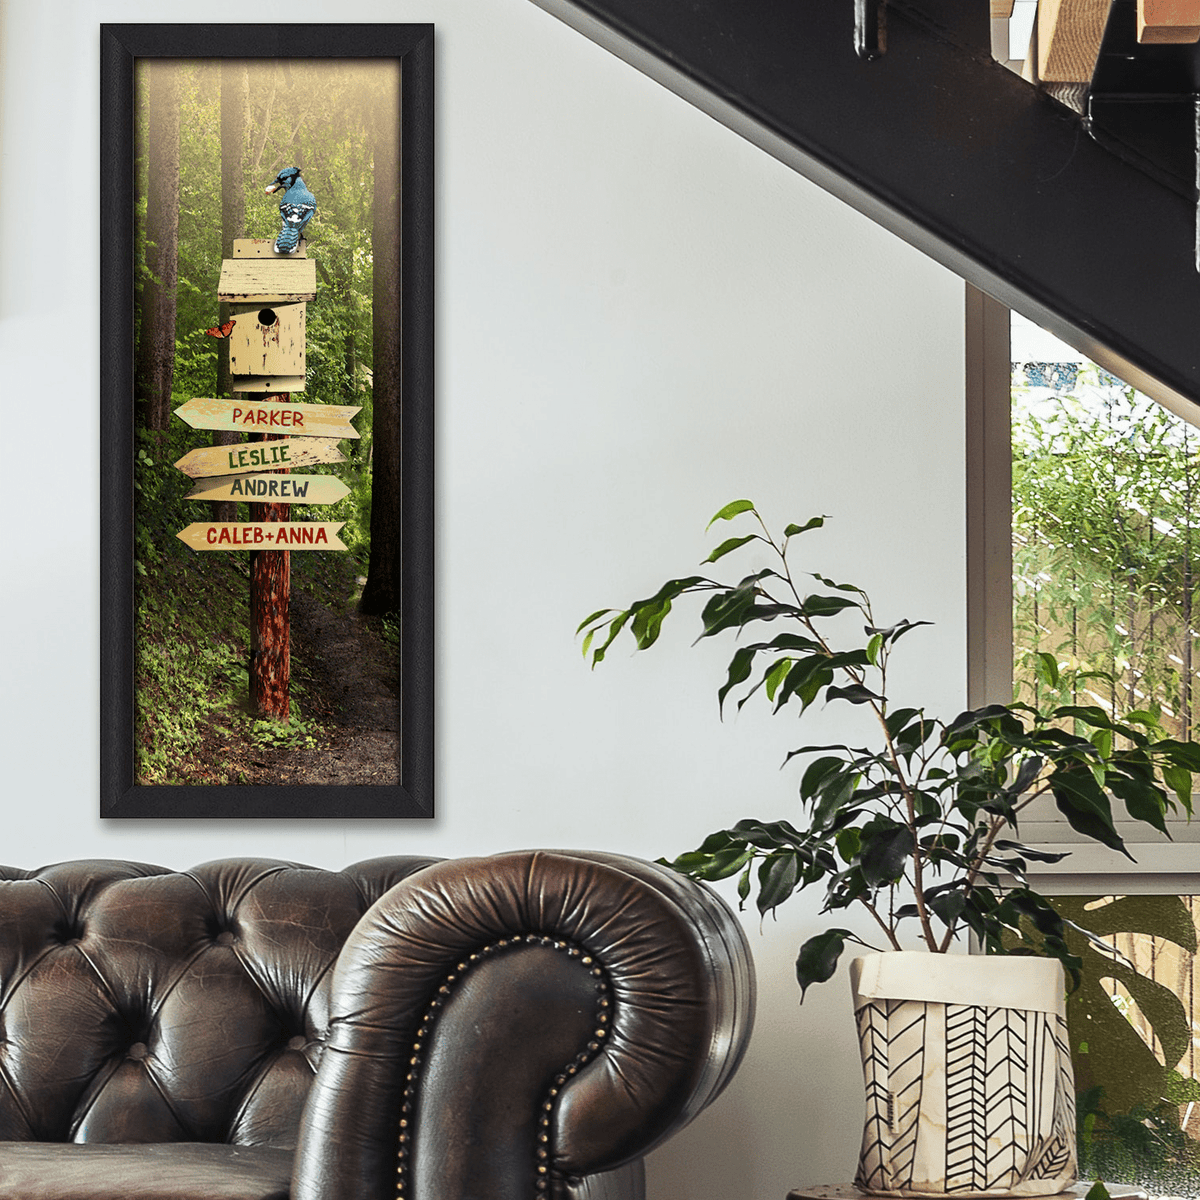 Personal Prints has the best wilderness art decor that is personalized for you